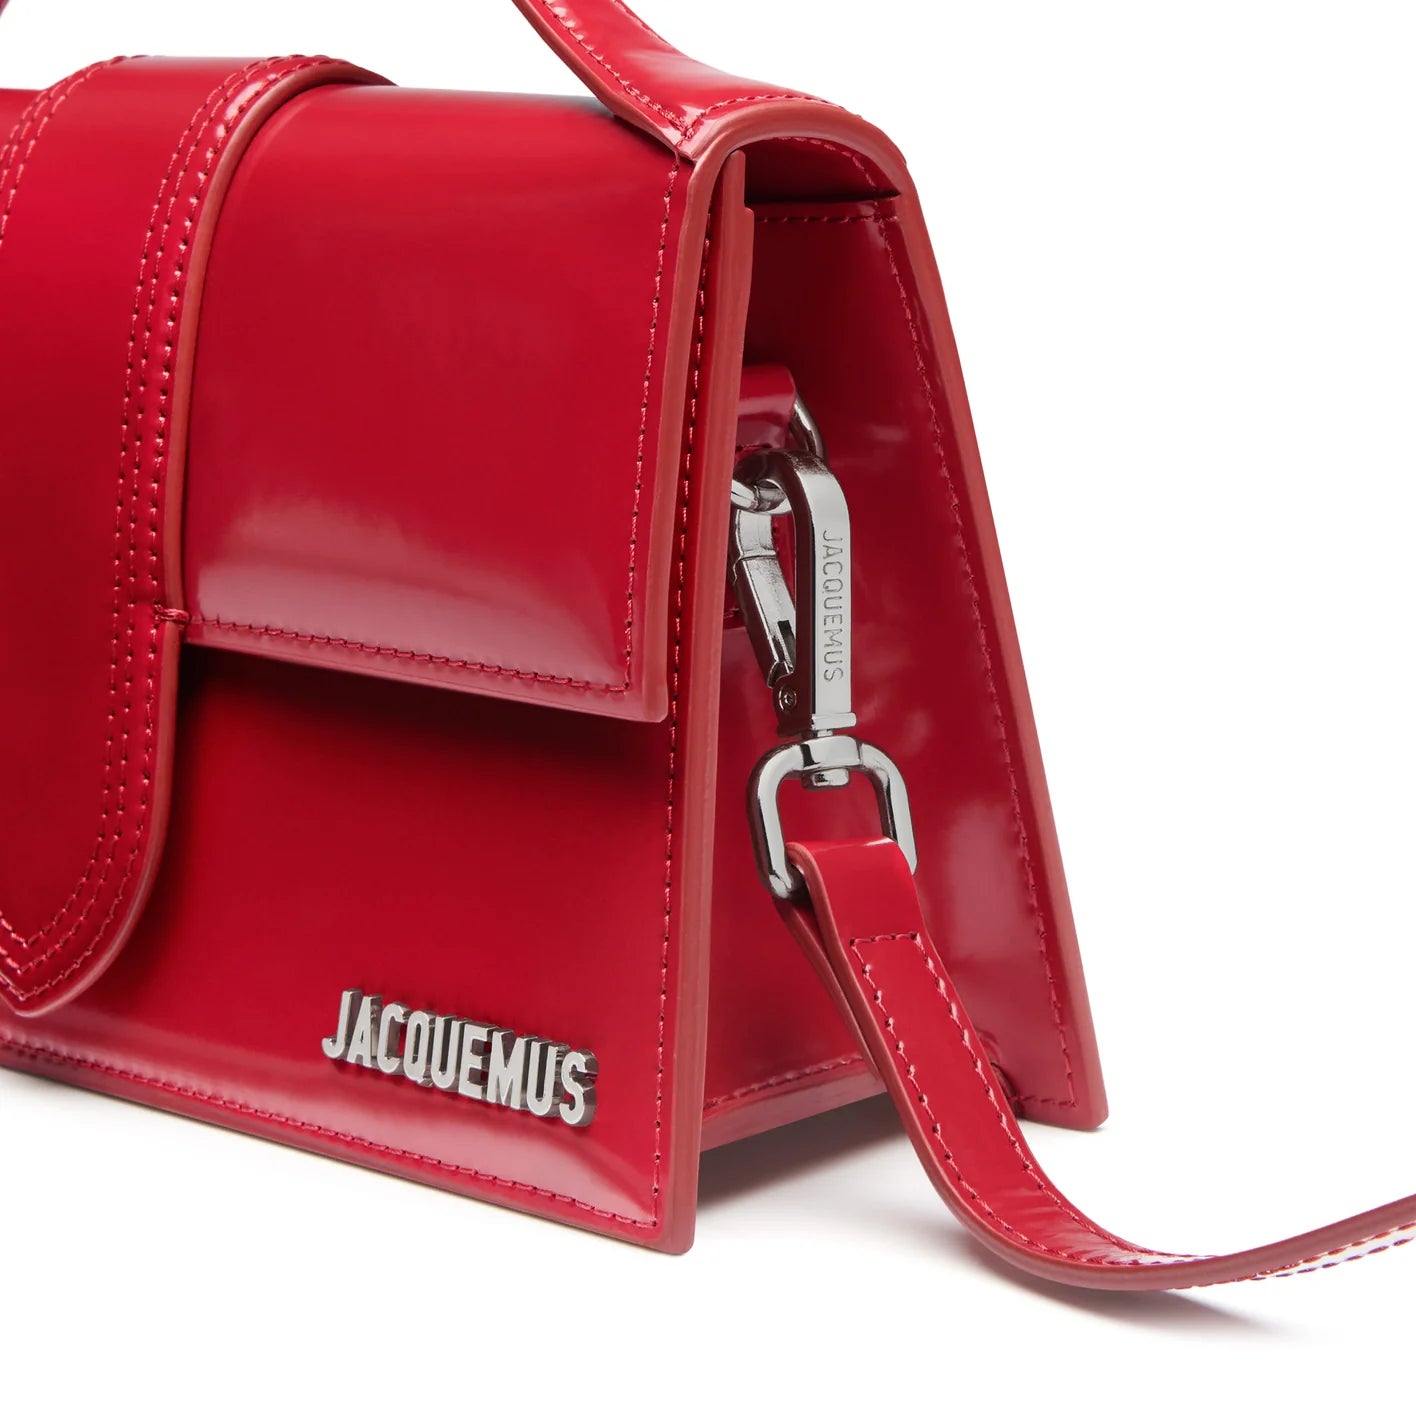 Le Bambino Bag - Jacquemus - Leather - Red